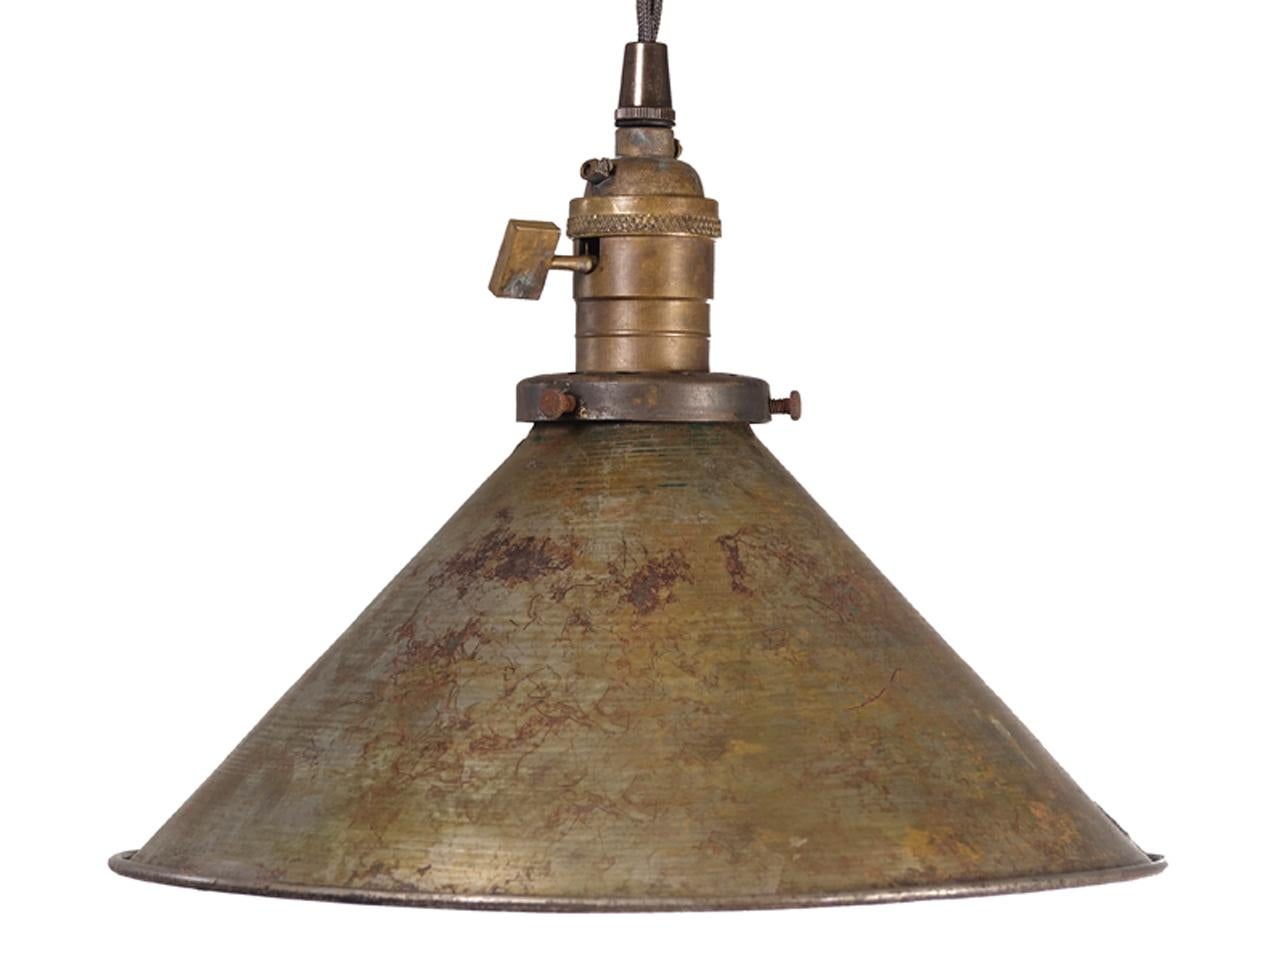 These early mirrored pendants have always been a first choice for industrial style. The heavy gauge steel shade has an aged patina as well as the mirrors. The rustic look is just right and the cobalt blue mirrors are striking and unique. They are